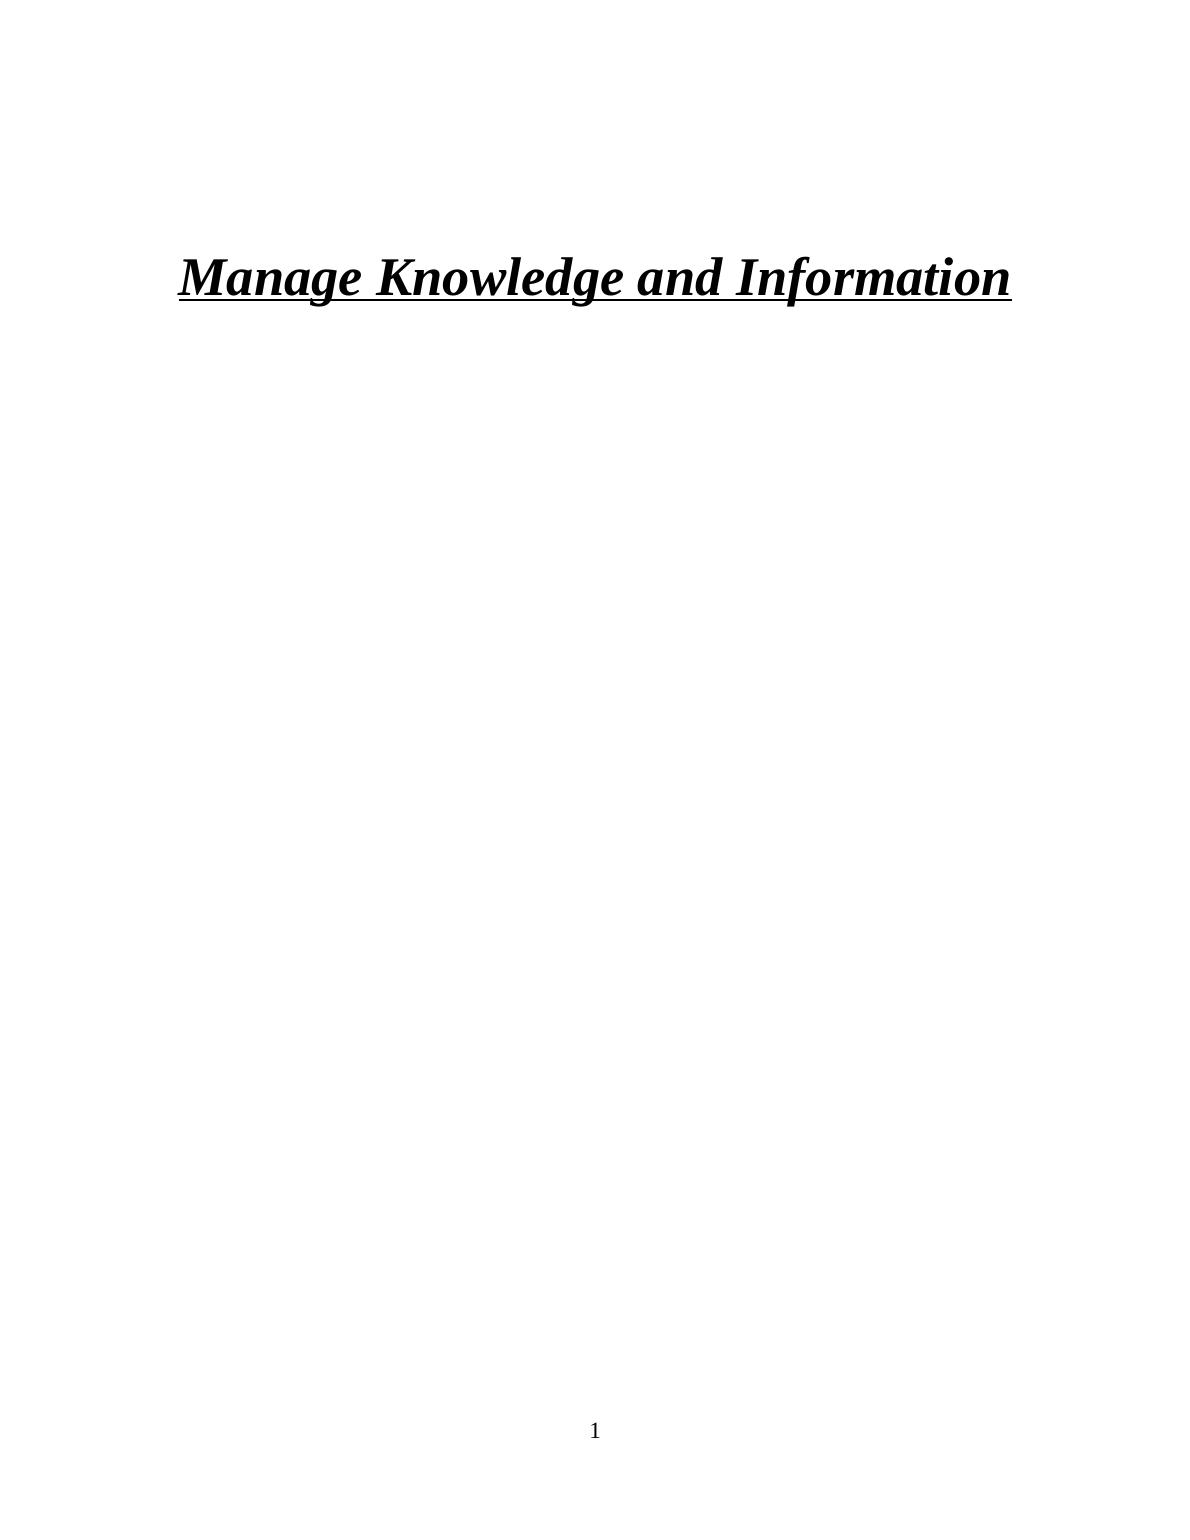 Manage Knowledge and Information_1